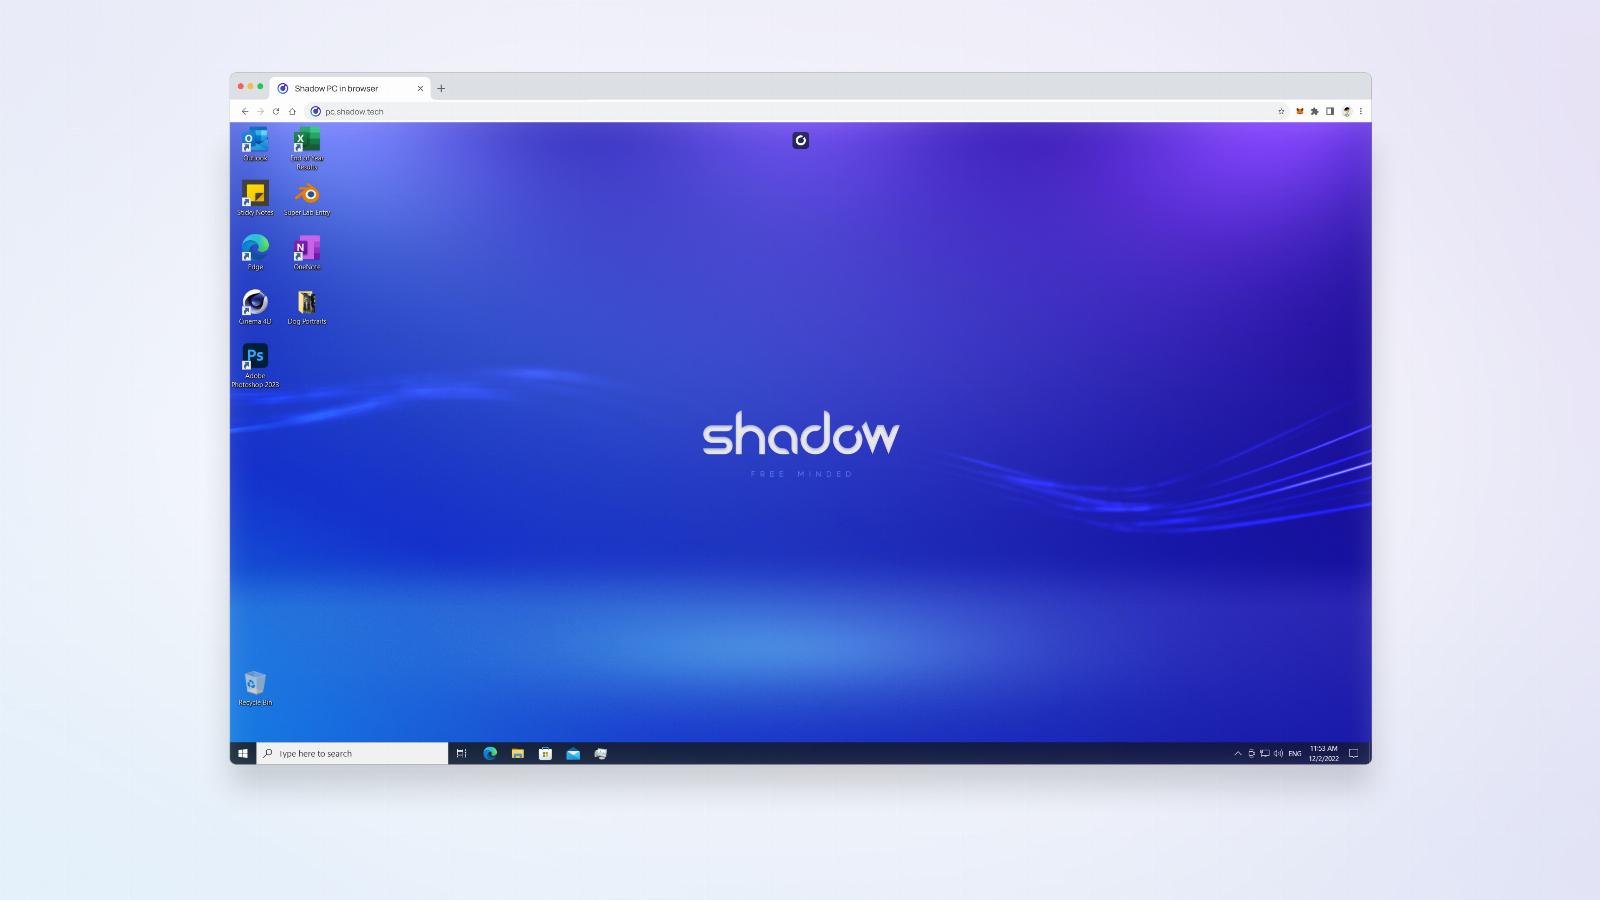 Shadow launches Windows-based cloud PCs for $9.99 per month